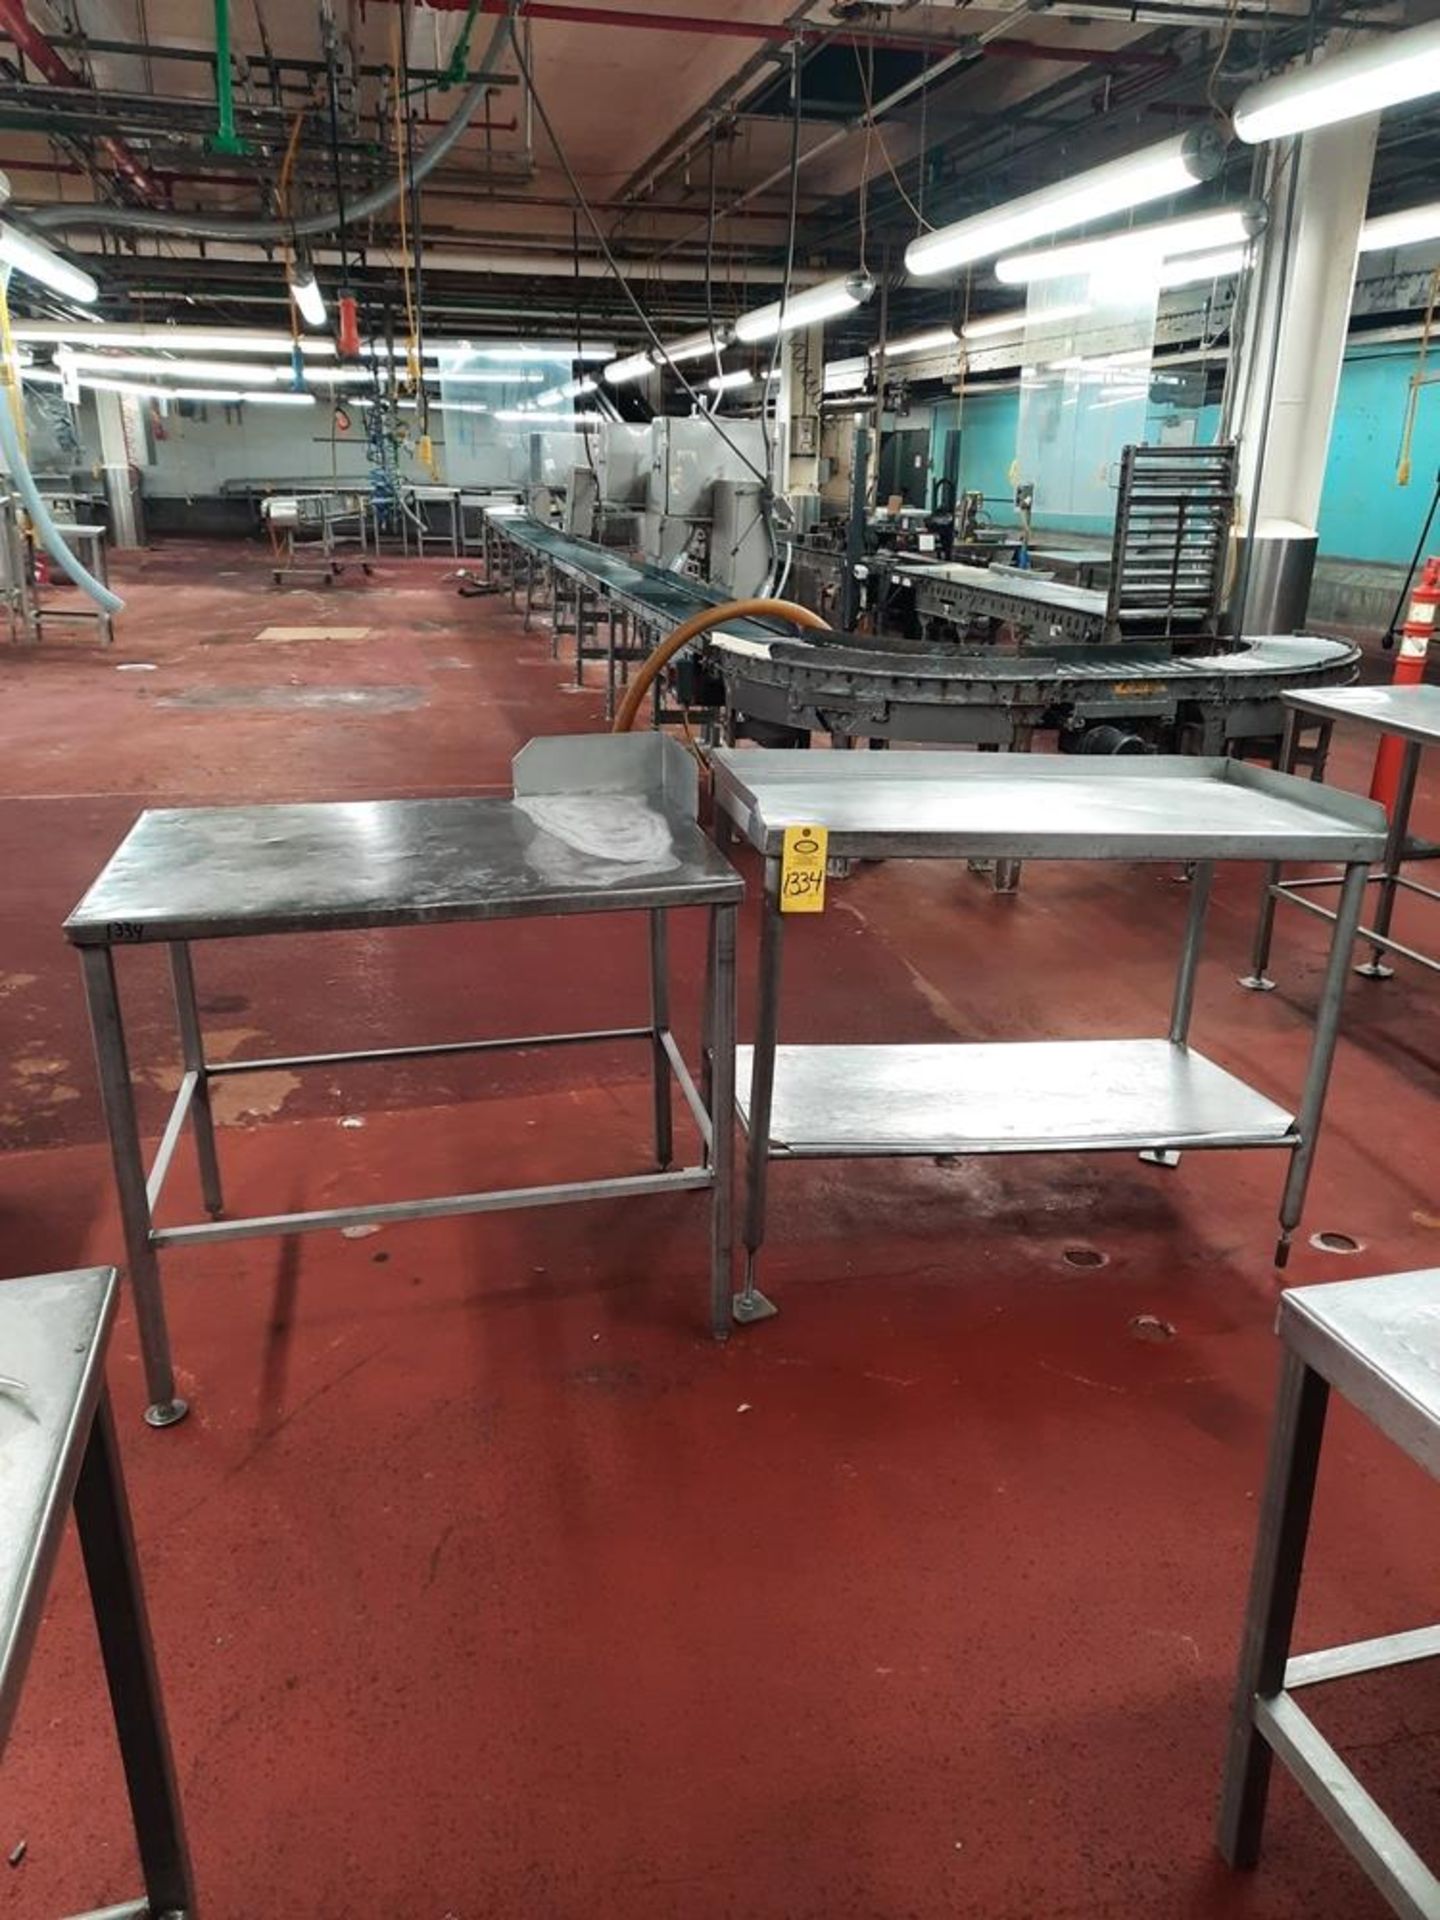 Lot Stainless Steel Tables, (1) 31" W X 43" L, (1) 2' W X 4' L : Required Loading Fee $75.00,